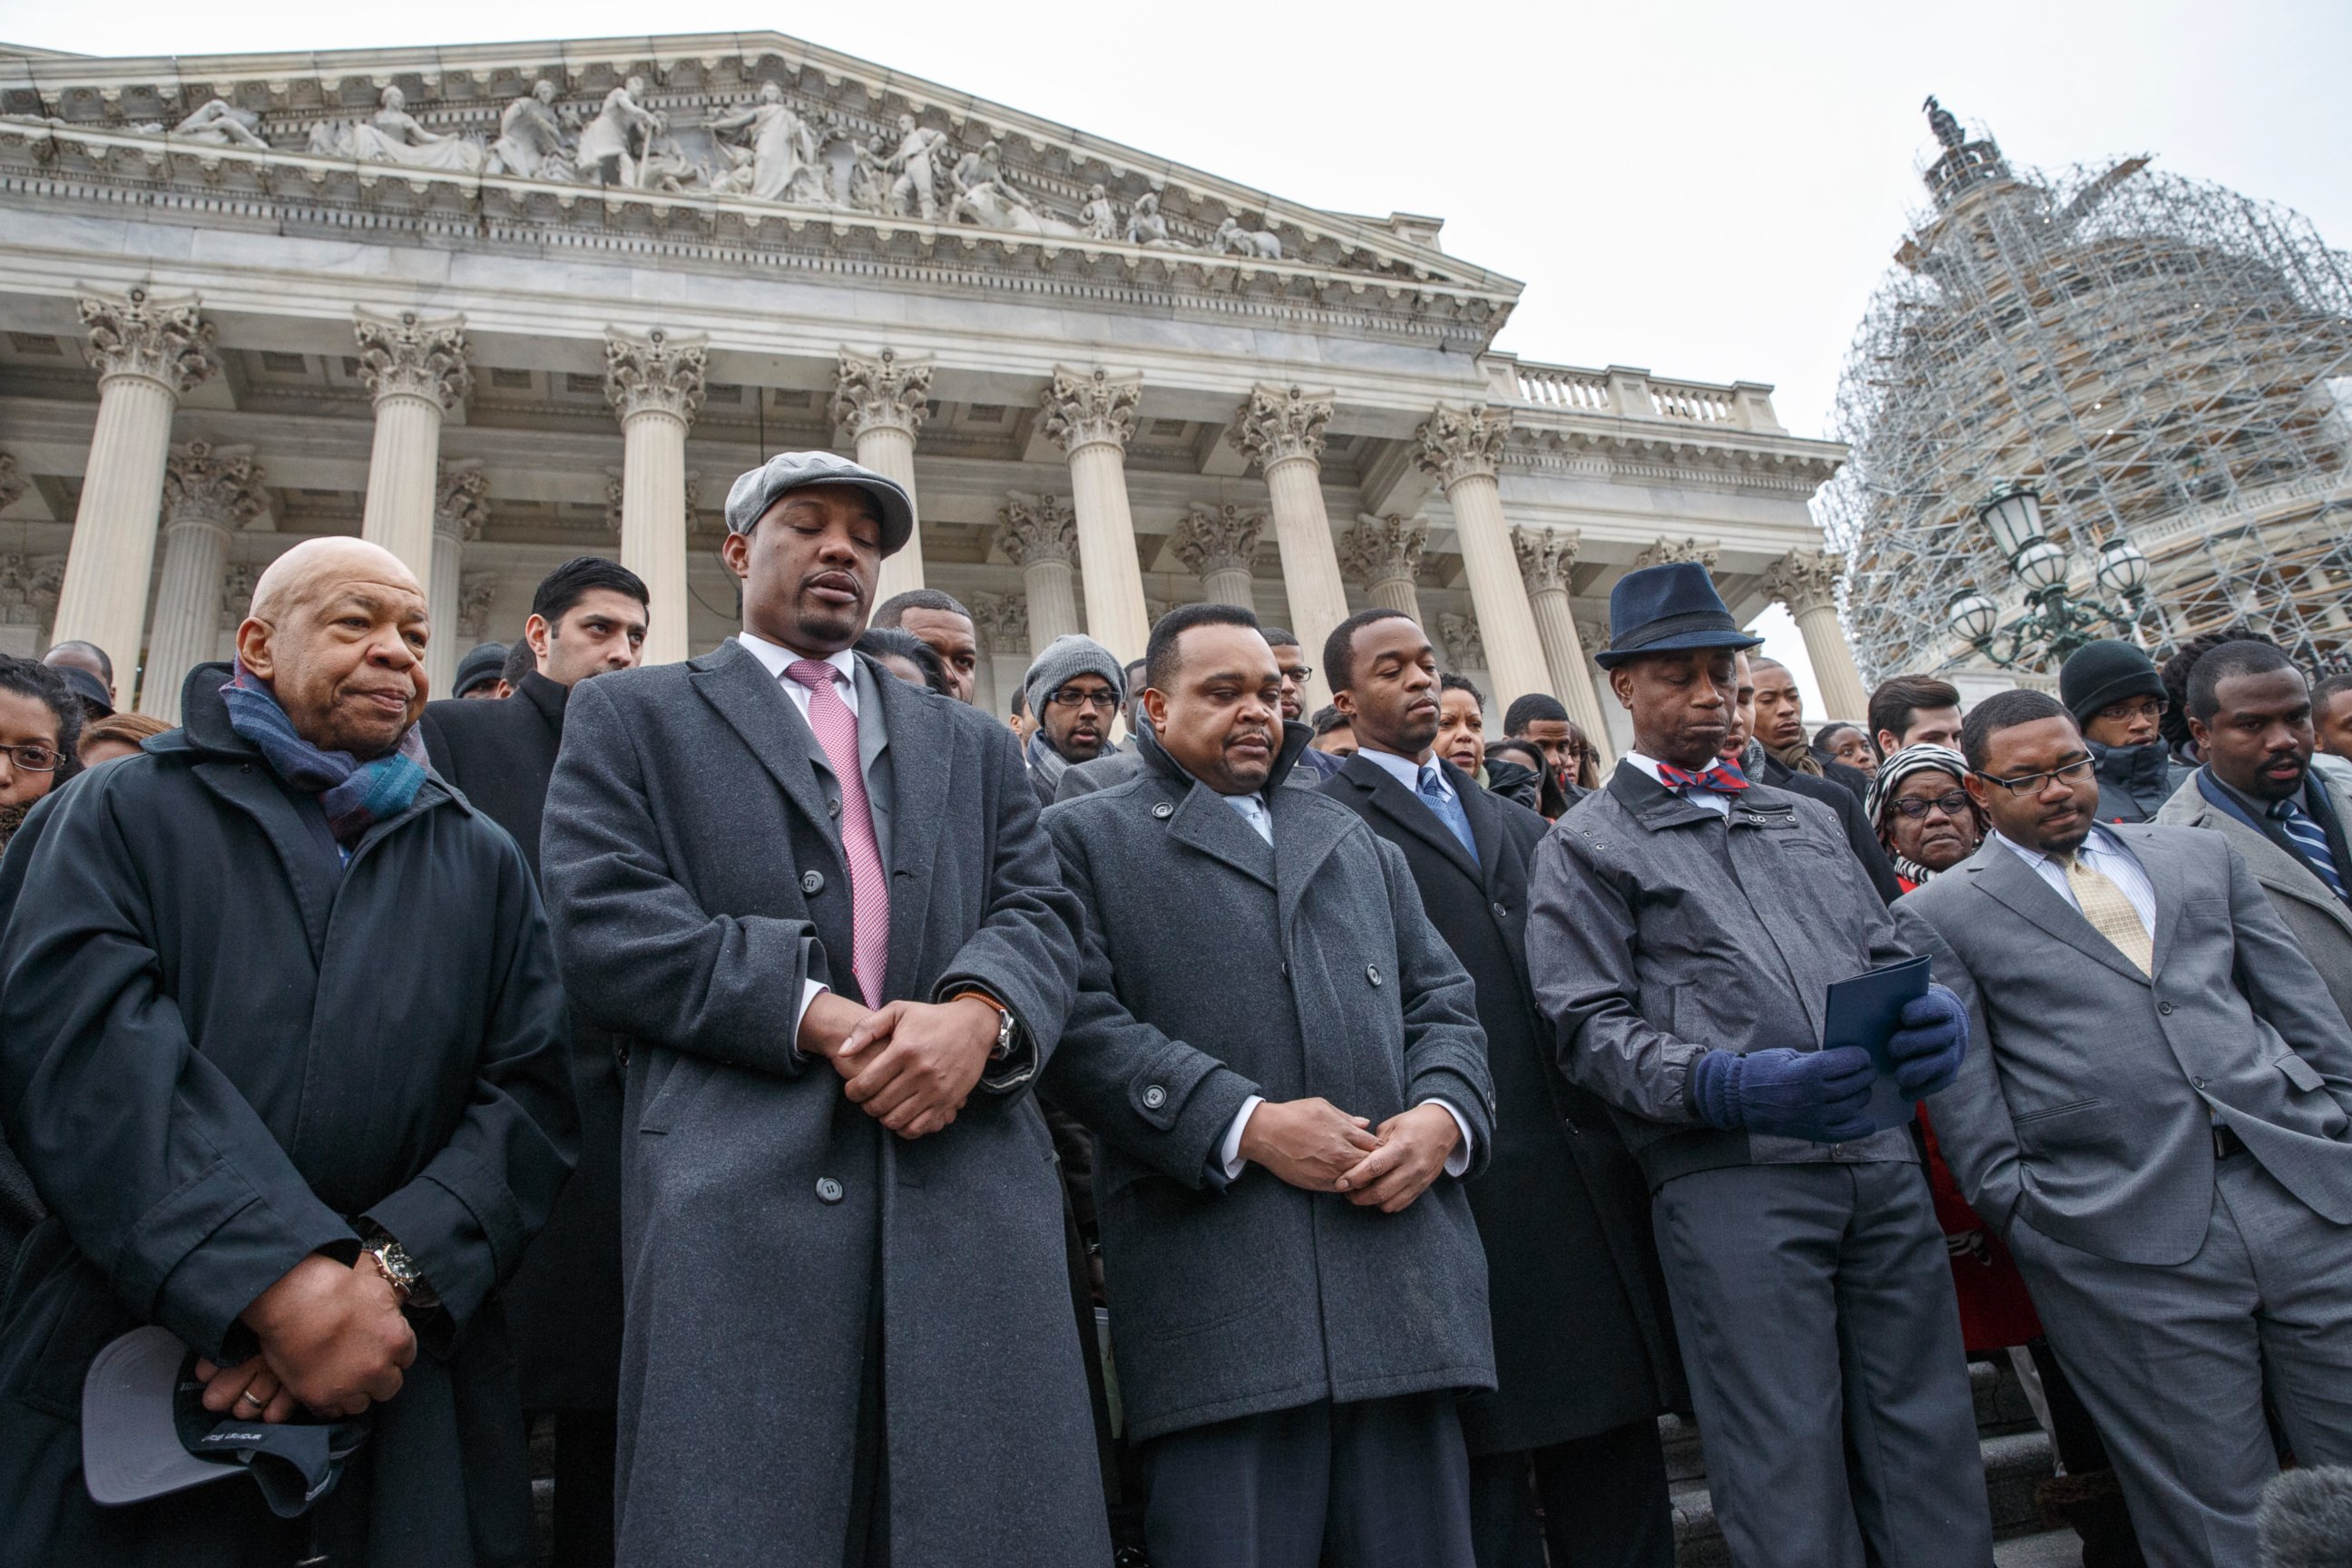 PHOTO: Congressional staff members, joined by Rep. Elijah Cummings, gather on Capitol Hill in Washington on Dec. 11, 2014.